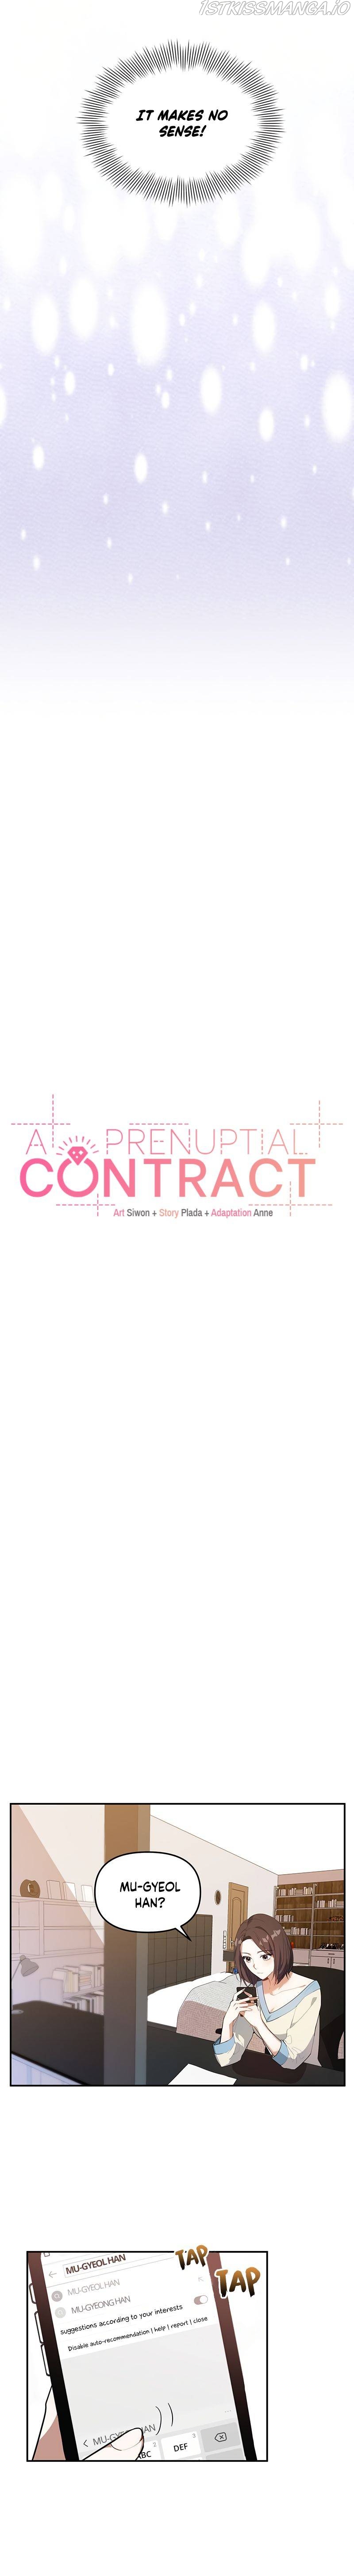 A Prenuptial Contract Chapter 2 - Page 6